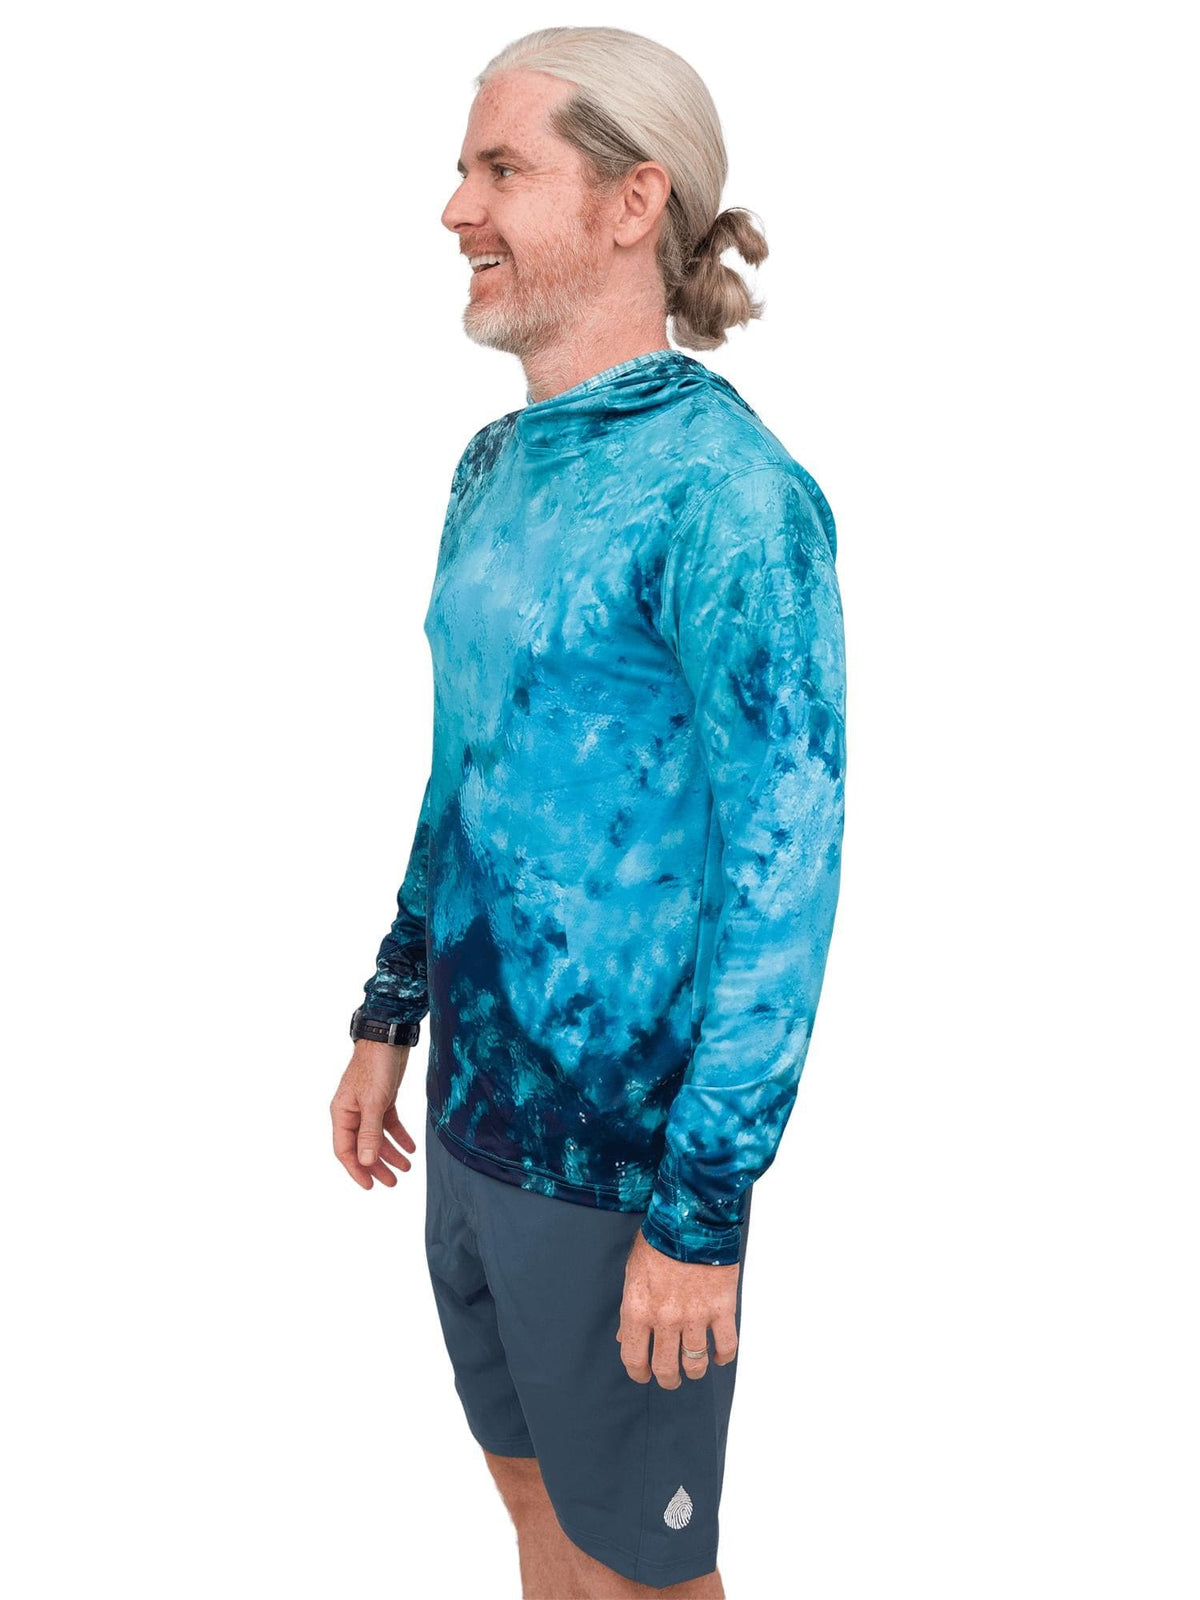 Fountain of Youth Sun Shirt | Swim | Dive Skin | Surf | UPF 50+ | male [M] | Recycled Polyester/Spandex